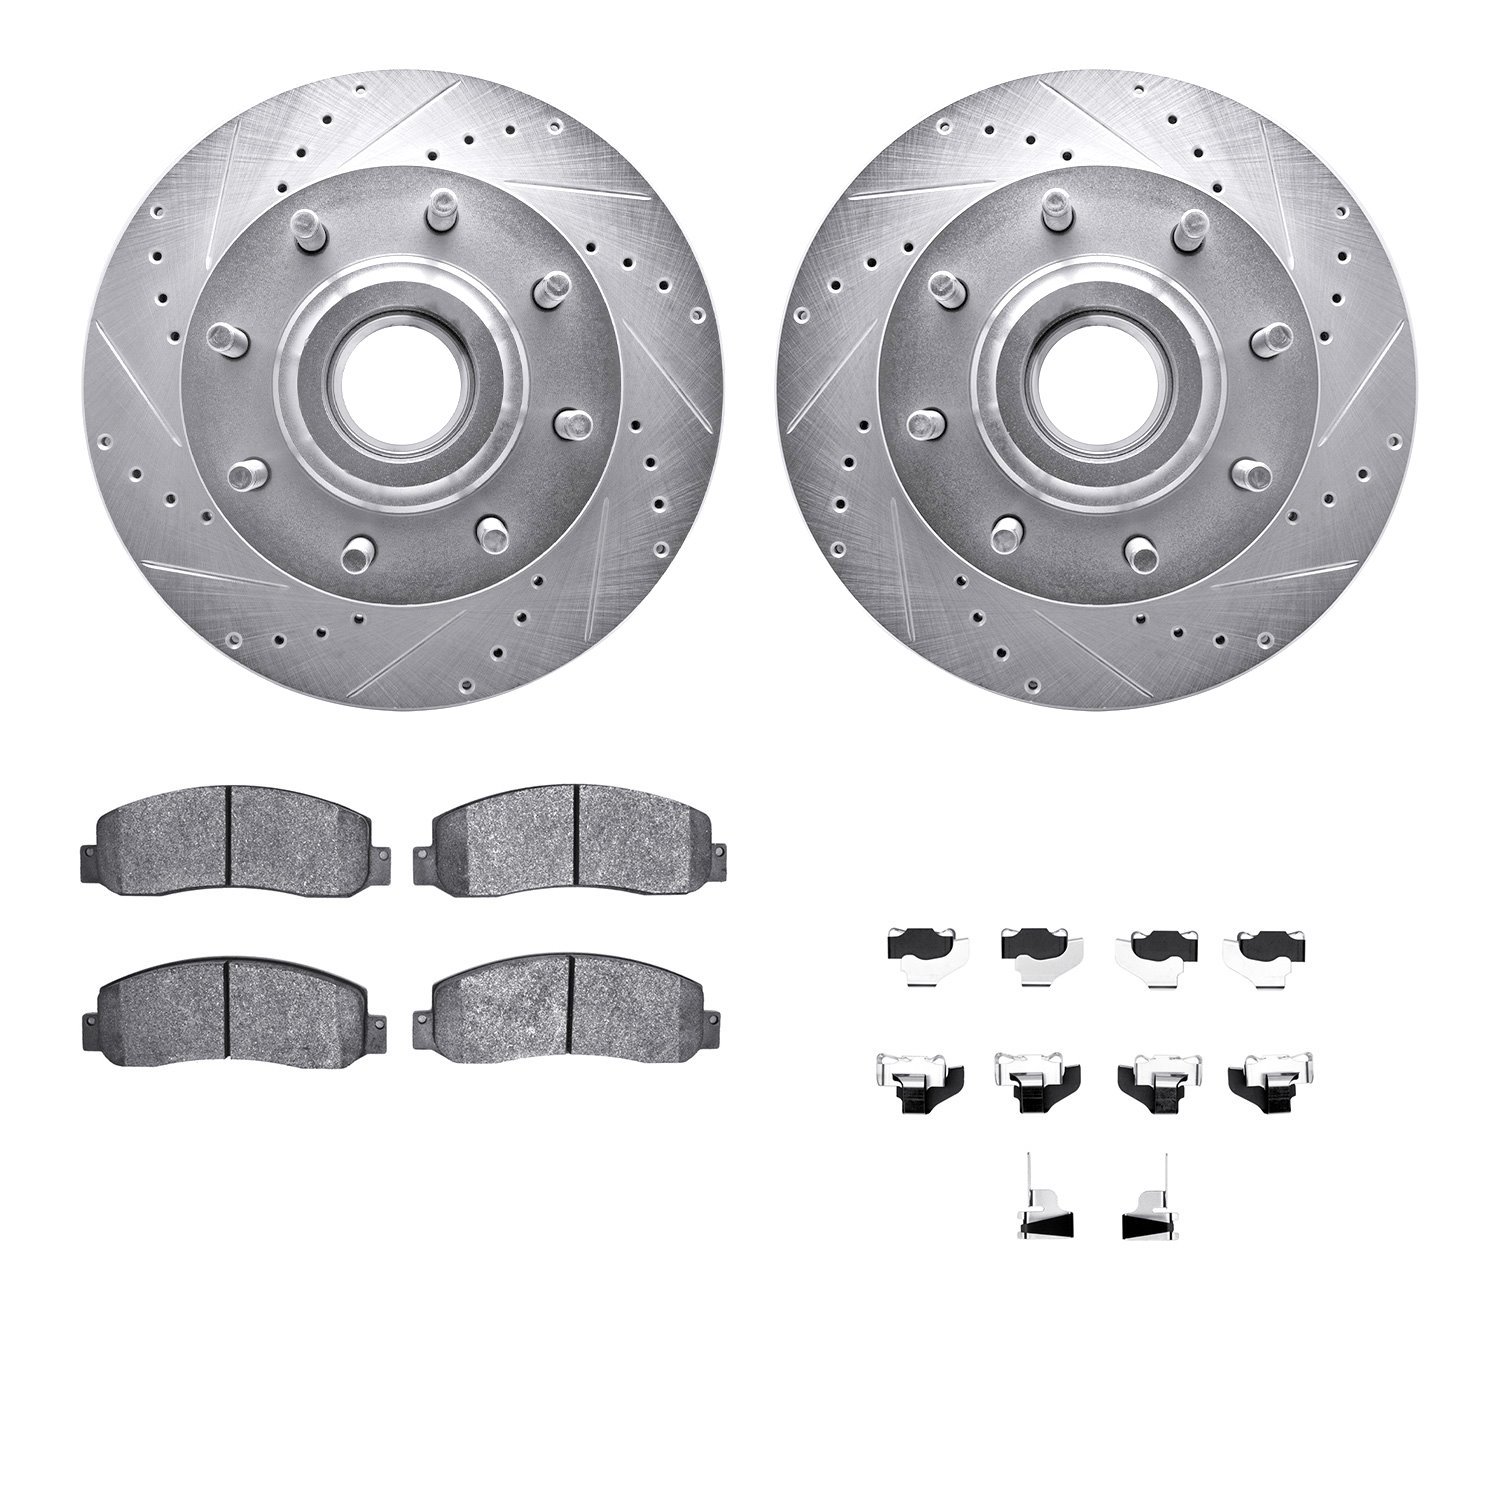 7212-99216 Drilled/Slotted Rotors w/Heavy-Duty Brake Pads Kit & Hardware [Silver], 2006-2012 Ford/Lincoln/Mercury/Mazda, Positio